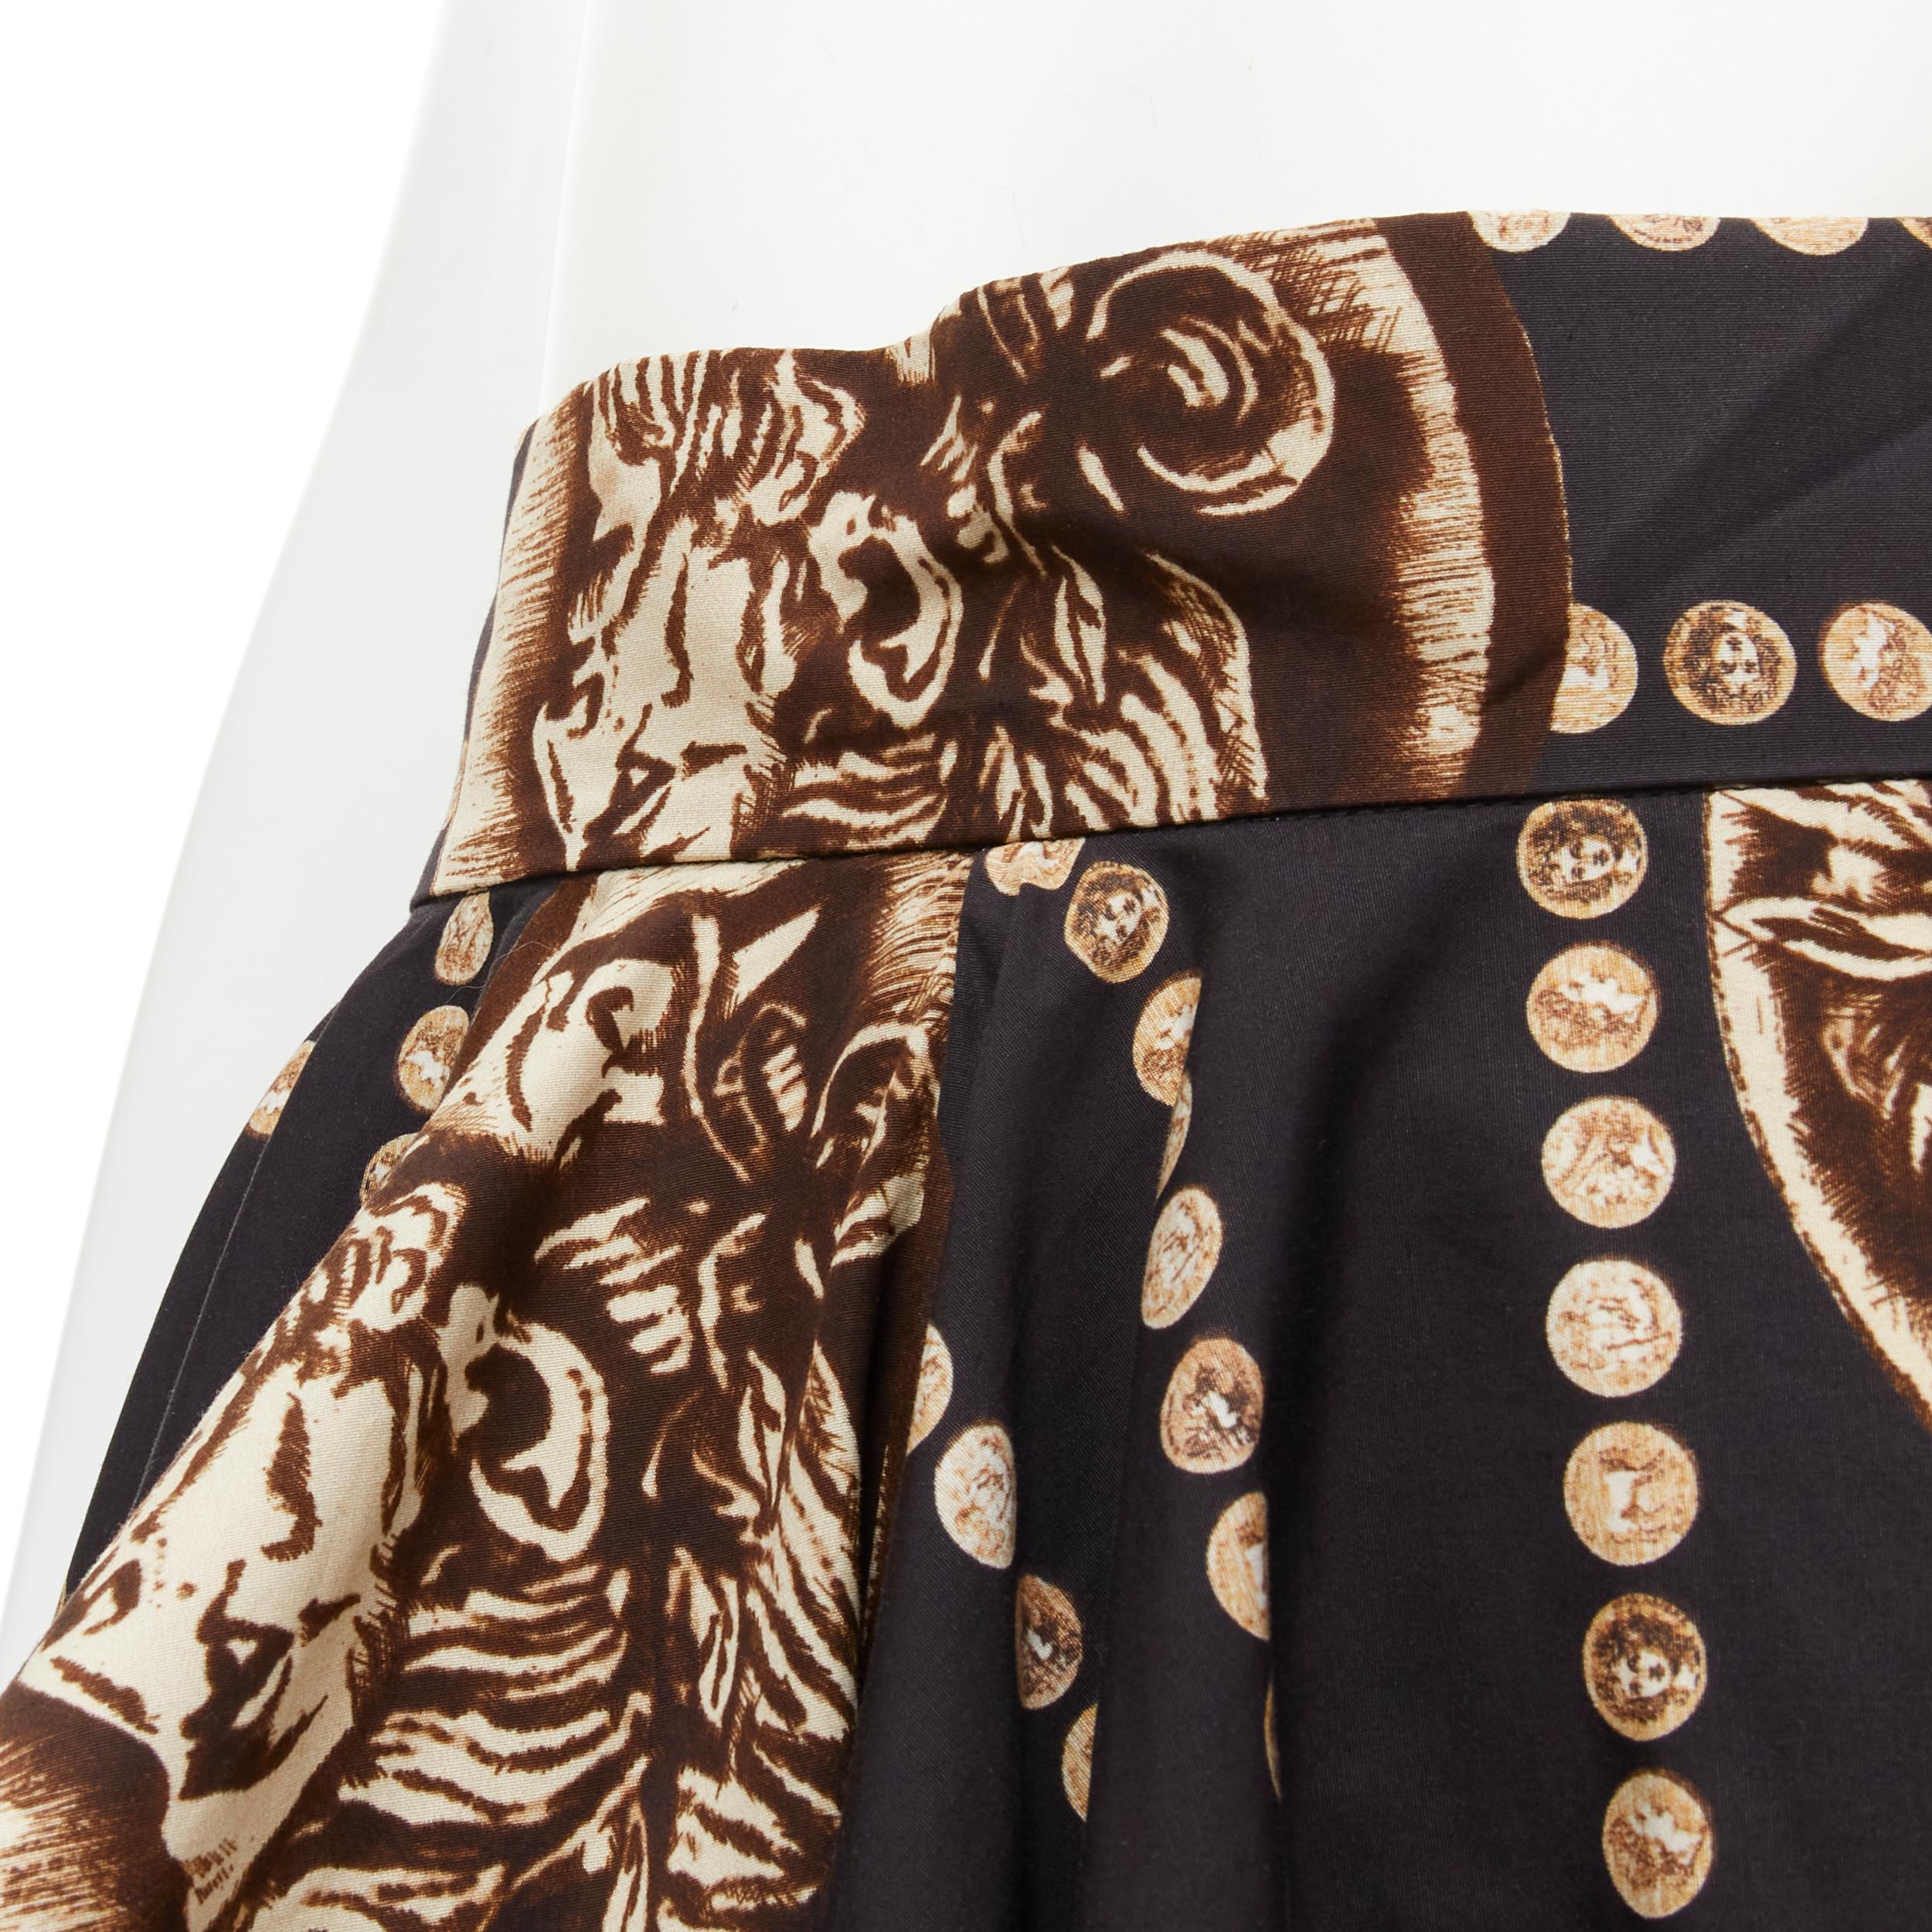 DOLCE GABBANA Antique Roman medallion coin black cotton flared skirt IT36 XS 
Reference: TGAS/B02058 
Brand: Dolce Gabbana 
Material: Cotton 
Color: Black 
Pattern: Abstract 
Closure: Zip 
Made in: Italy 

CONDITION: 
Condition: Excellent, this item